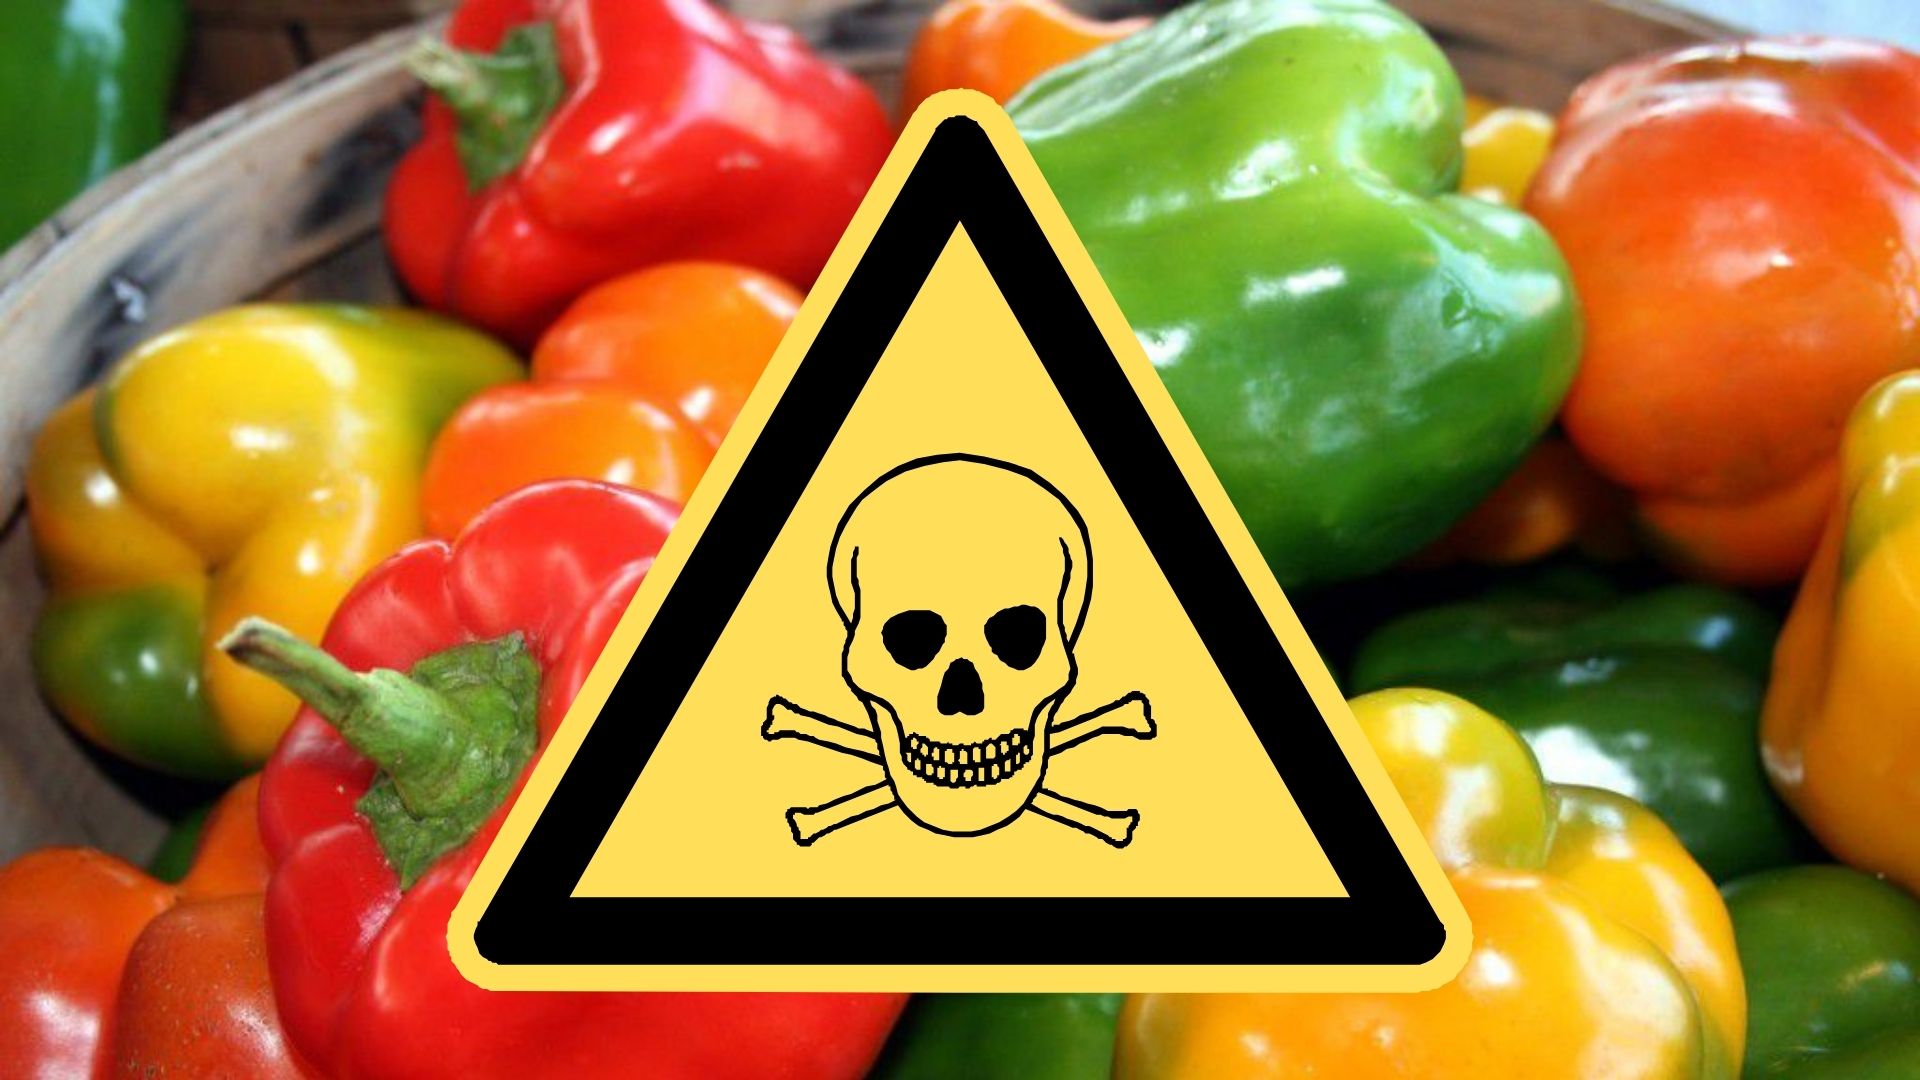 Poisonous bell peppers were brought to Ukraine. It contains an excessive concentration of insecticide and acaricide - formethanate.